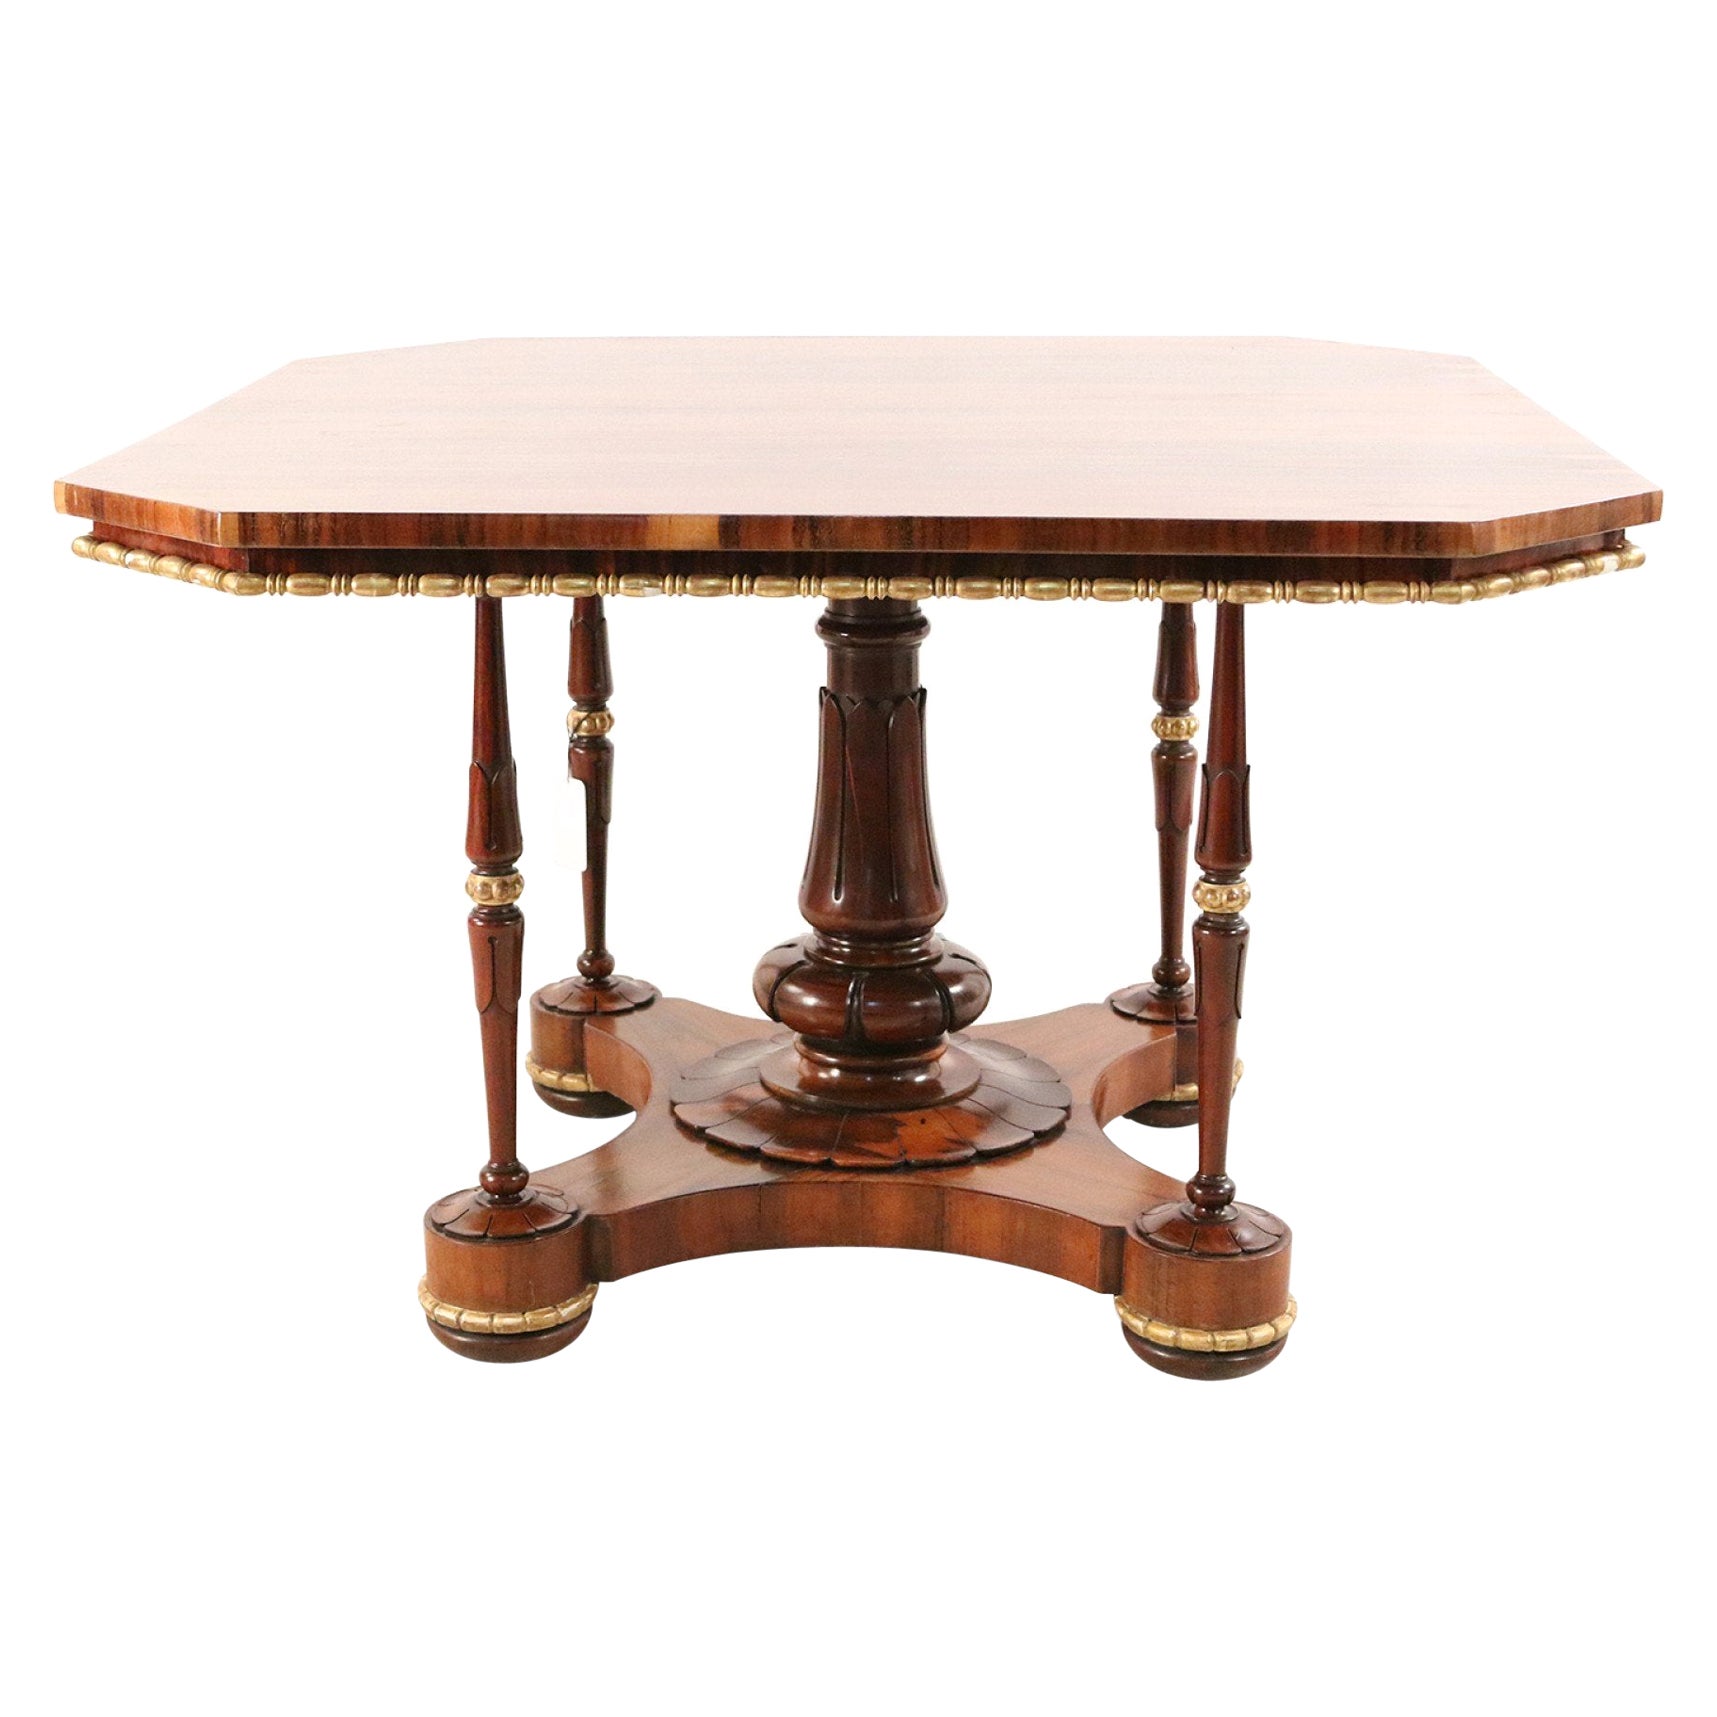 English Regency Square Canted Corner Walnut and Brass Trim Center Table